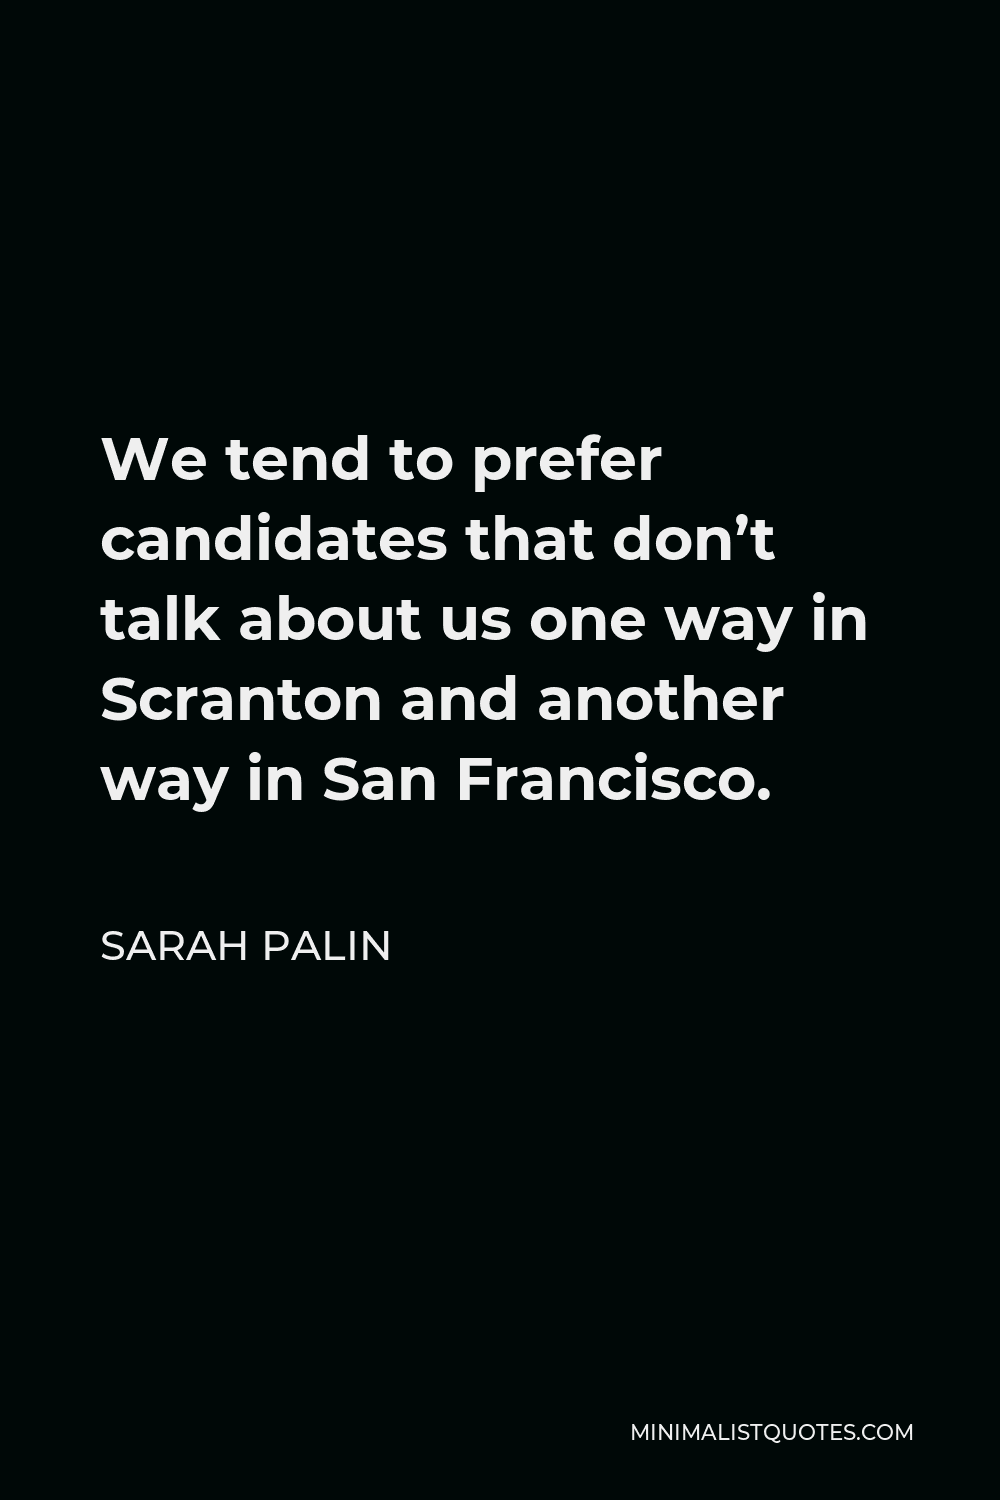 Sarah Palin Quote - We tend to prefer candidates that don’t talk about us one way in Scranton and another way in San Francisco.